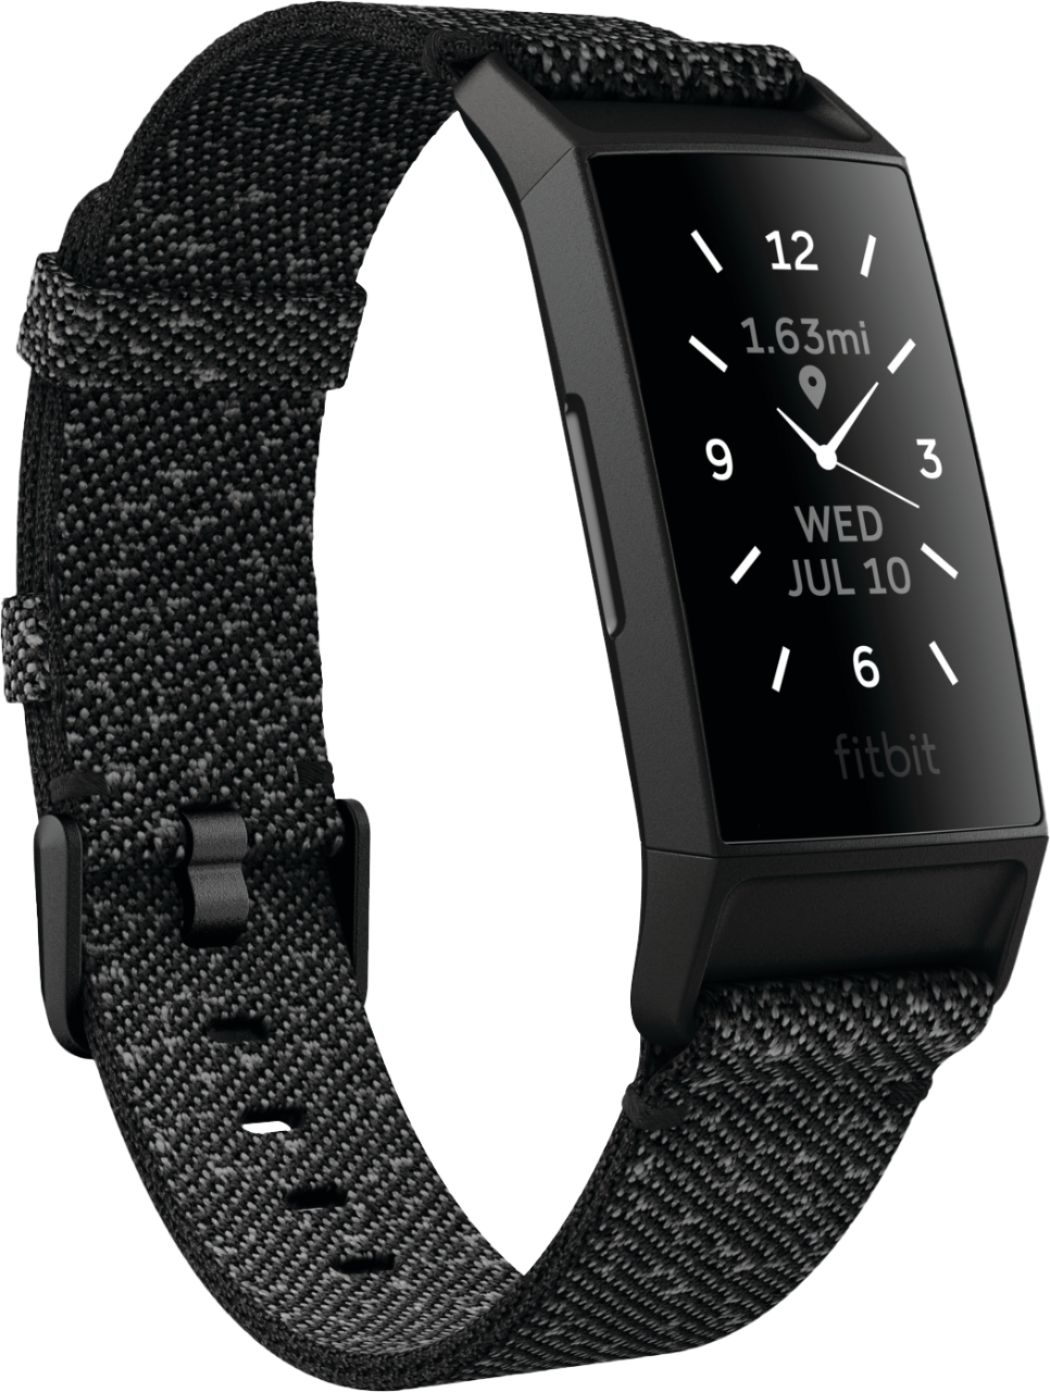 Customer Reviews: Fitbit Charge 4 